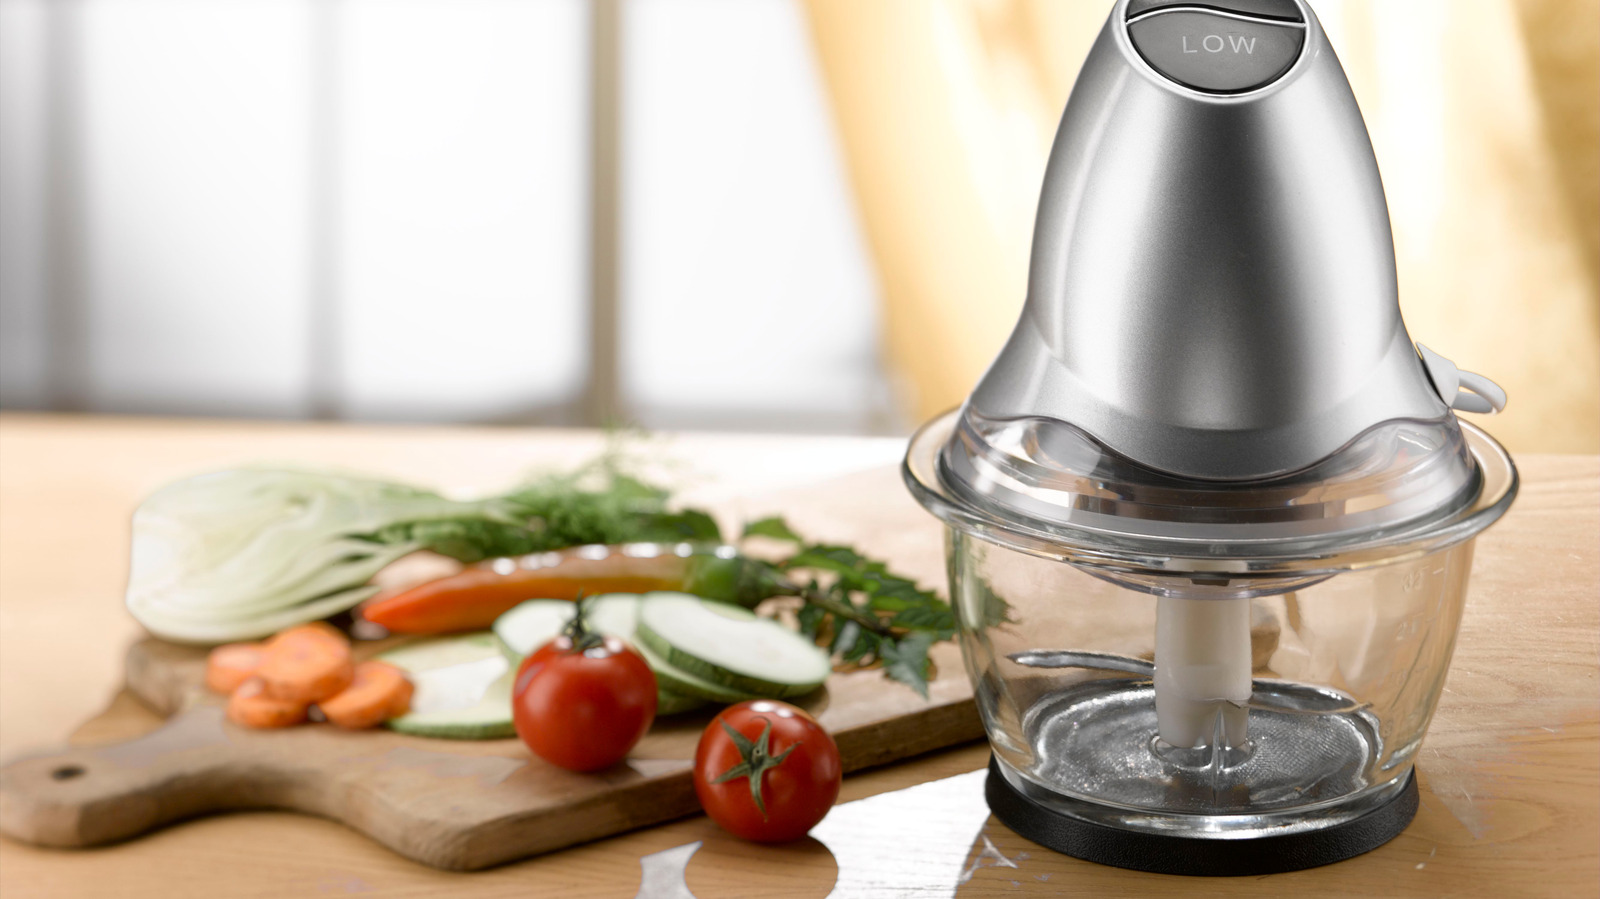 https://www.mashed.com/img/gallery/the-best-mini-food-processors-for-your-kitchen-in-2022/l-intro-1670252607.jpg